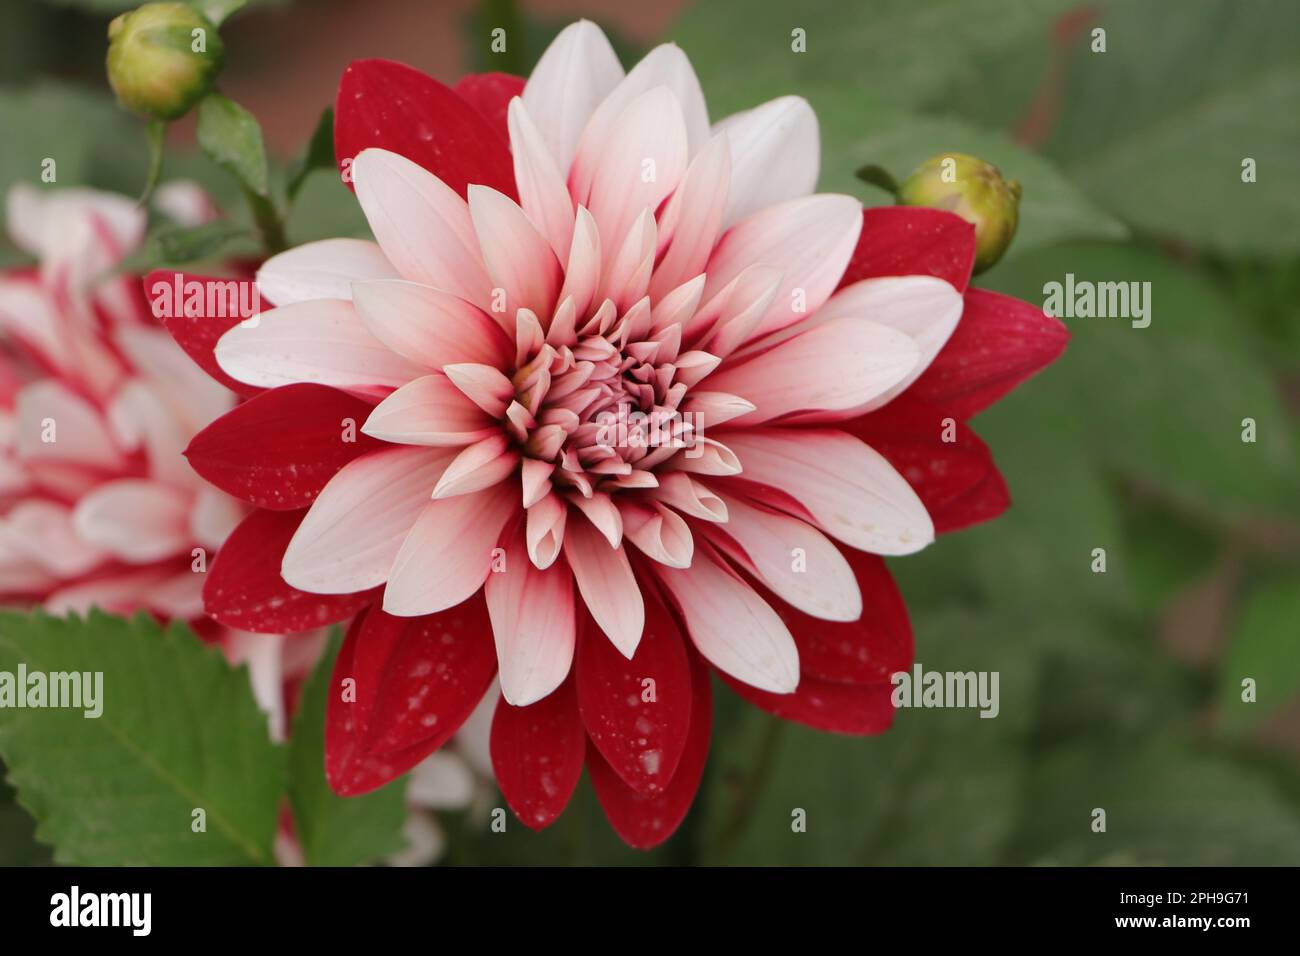 Desi flower. Beautiful bright red and white coloured dahlia flower in a house garden. Fresh healthy colourful and fragrant flowers. India spring. Stock Photo